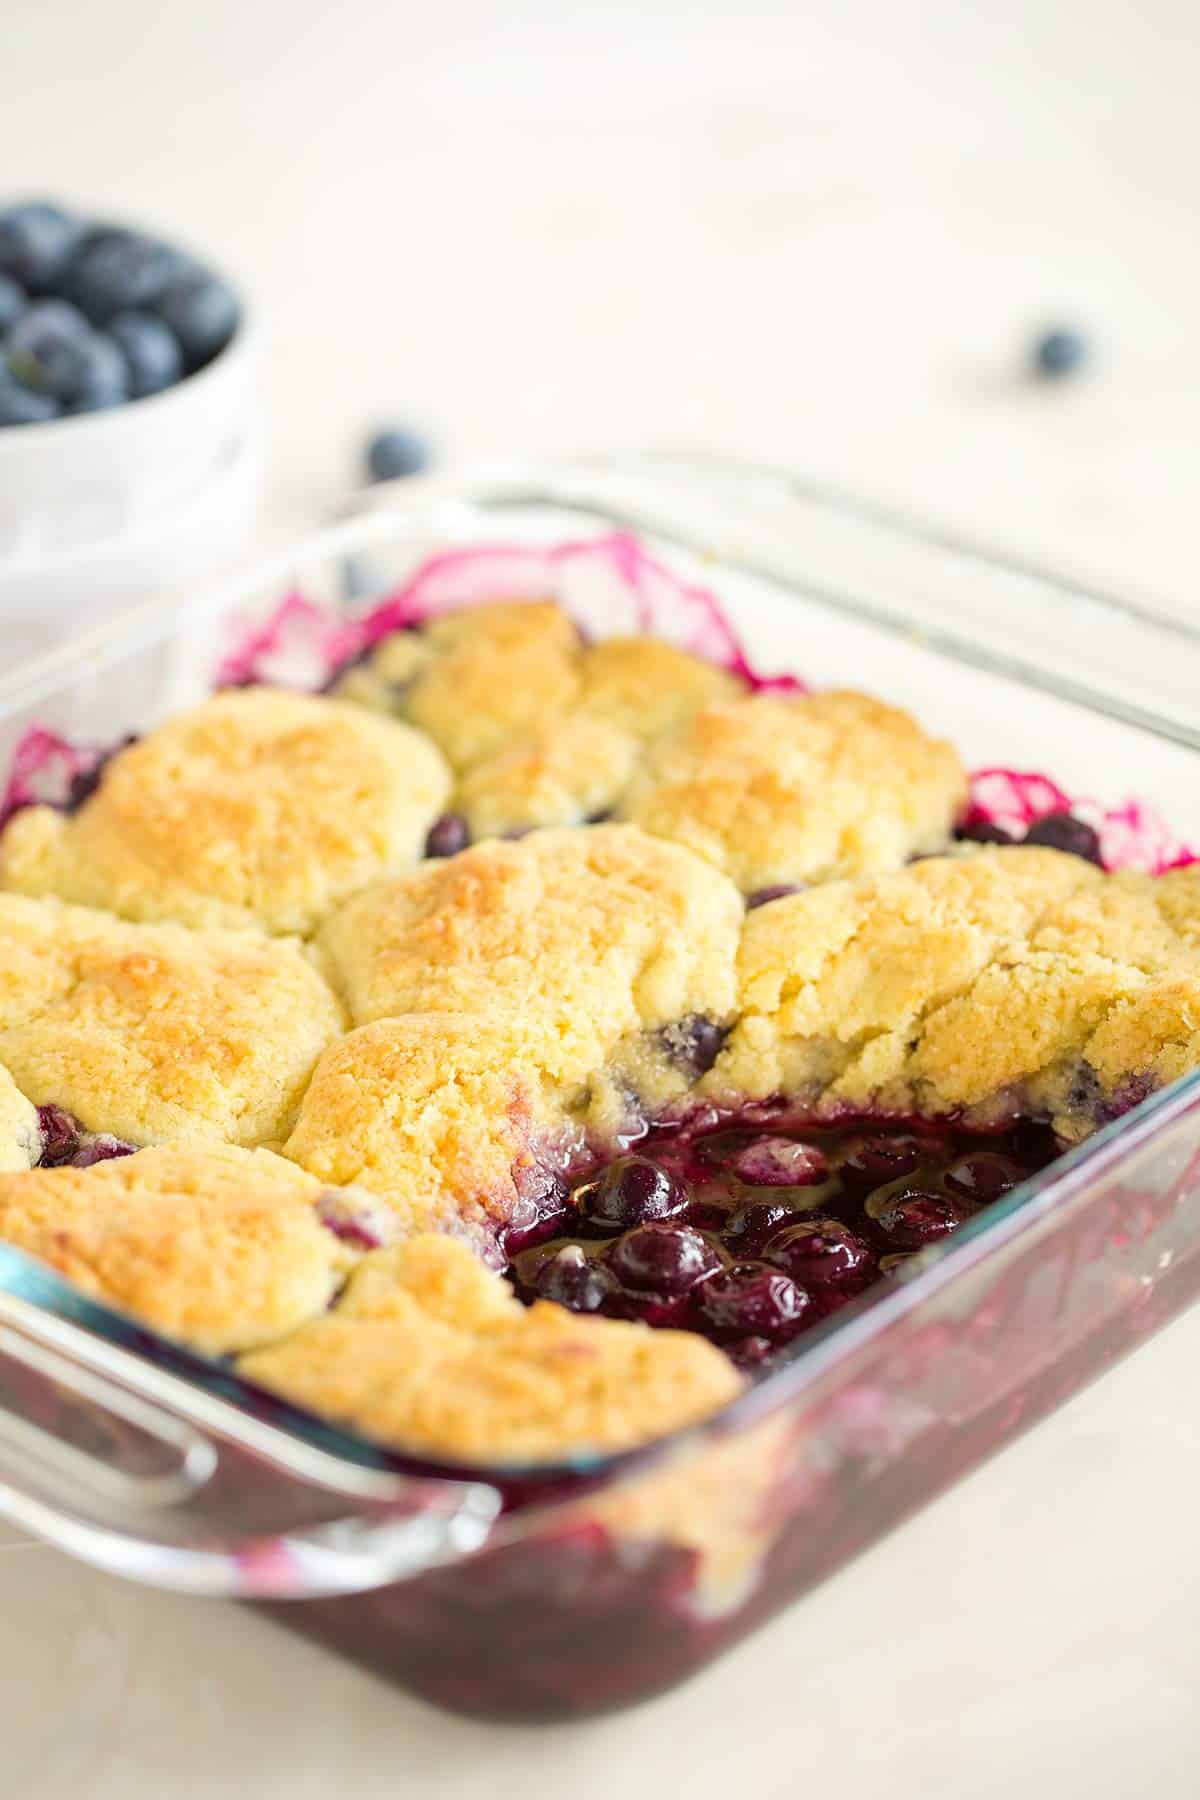 A pan of blueberry cobbler with a big scoop taken out.